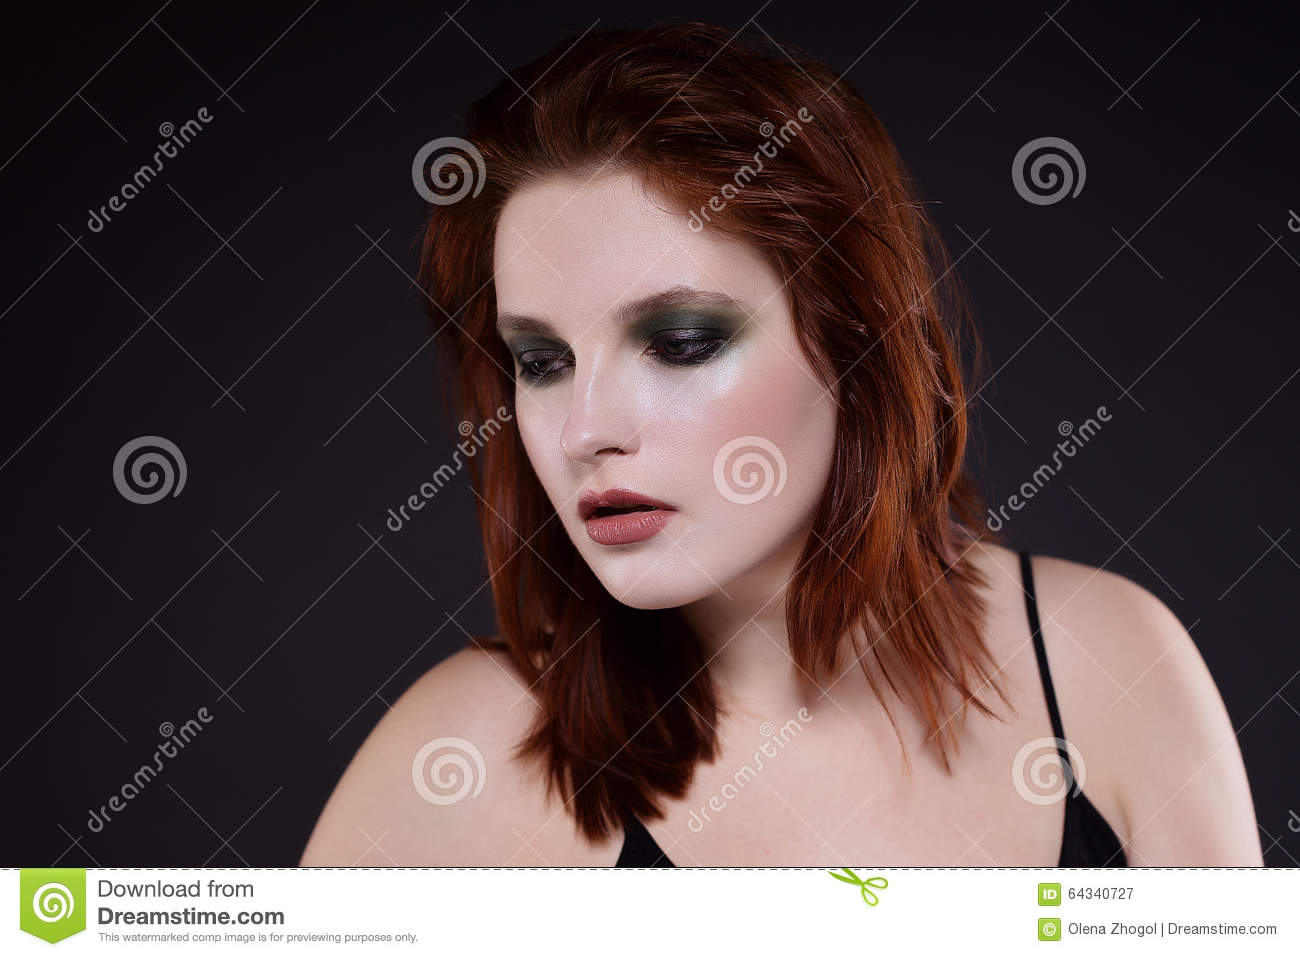 Makeup For Grey Hair And Green Eyes Redhaed Girl With Greensmoky Eyes Makeup Stock Image Image Of